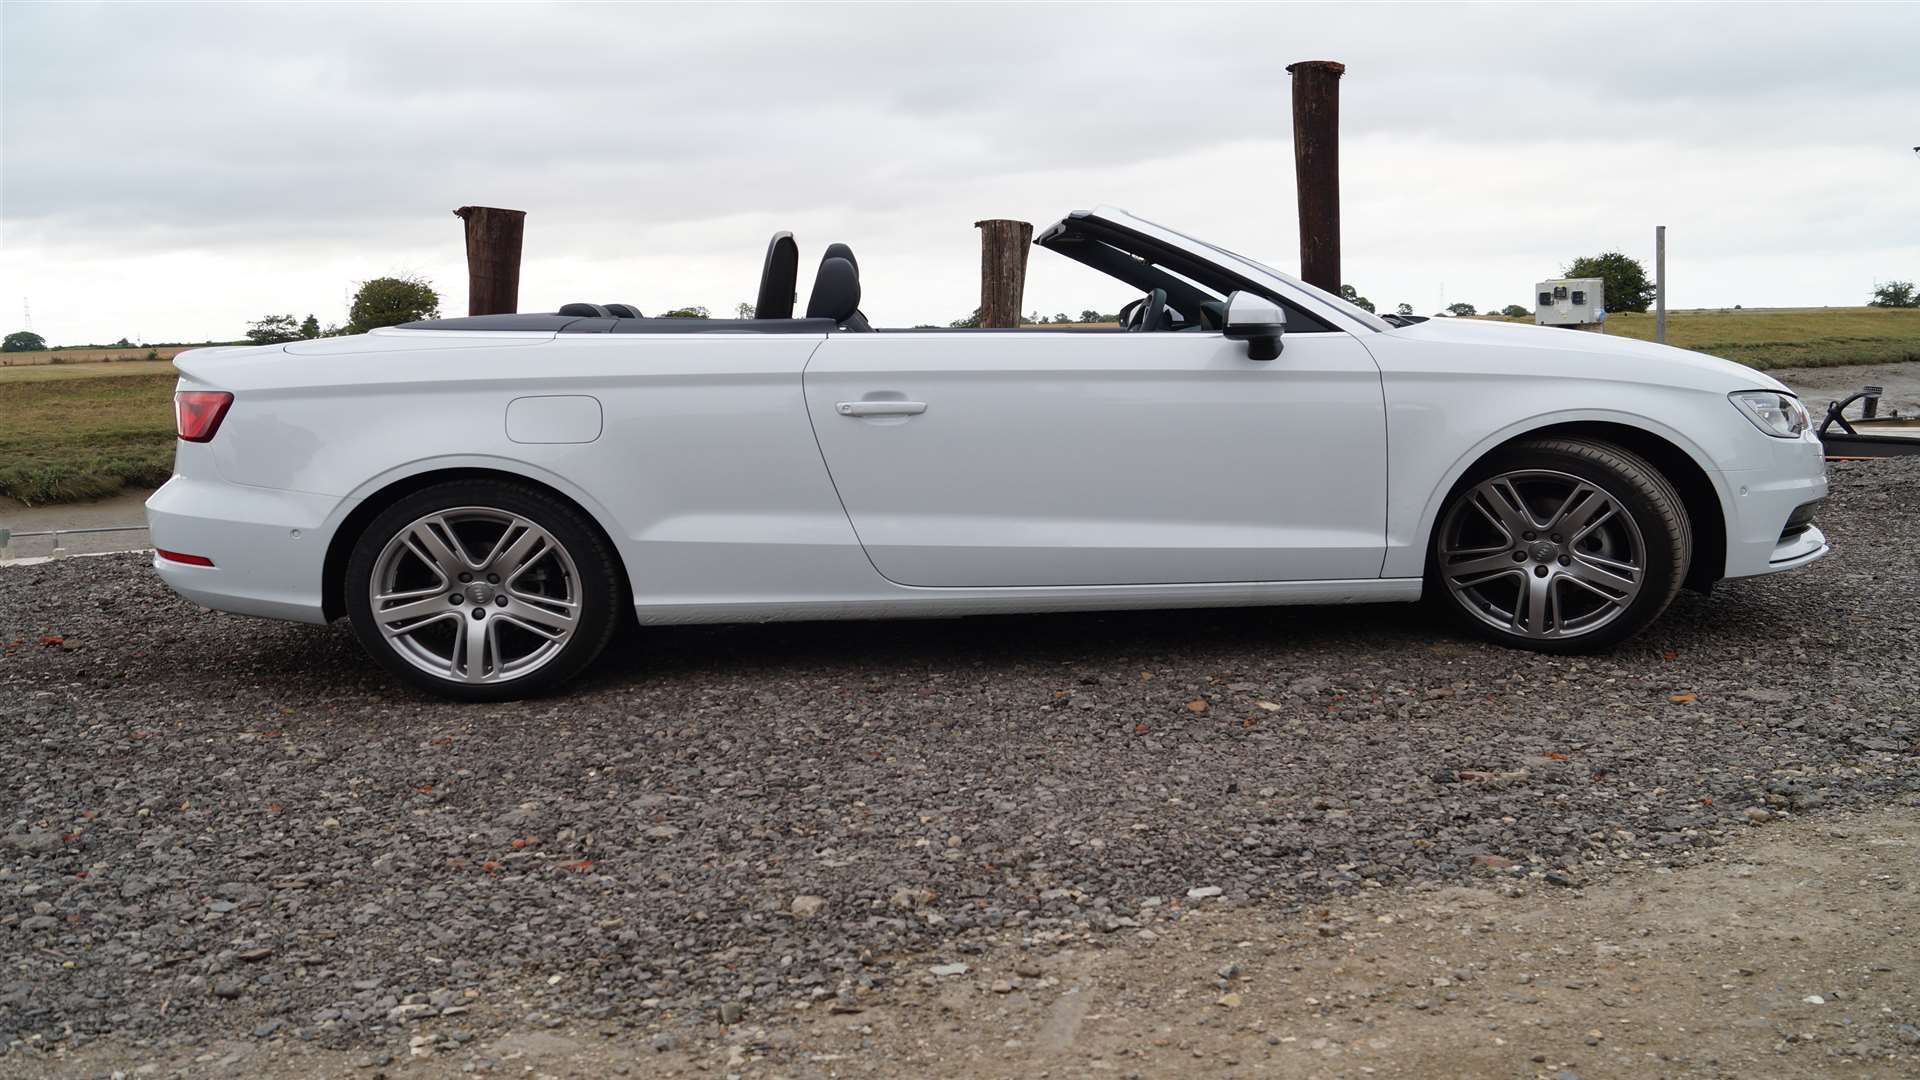 For a premium, roof down experience, it's impossible to argue against the A3's credentials